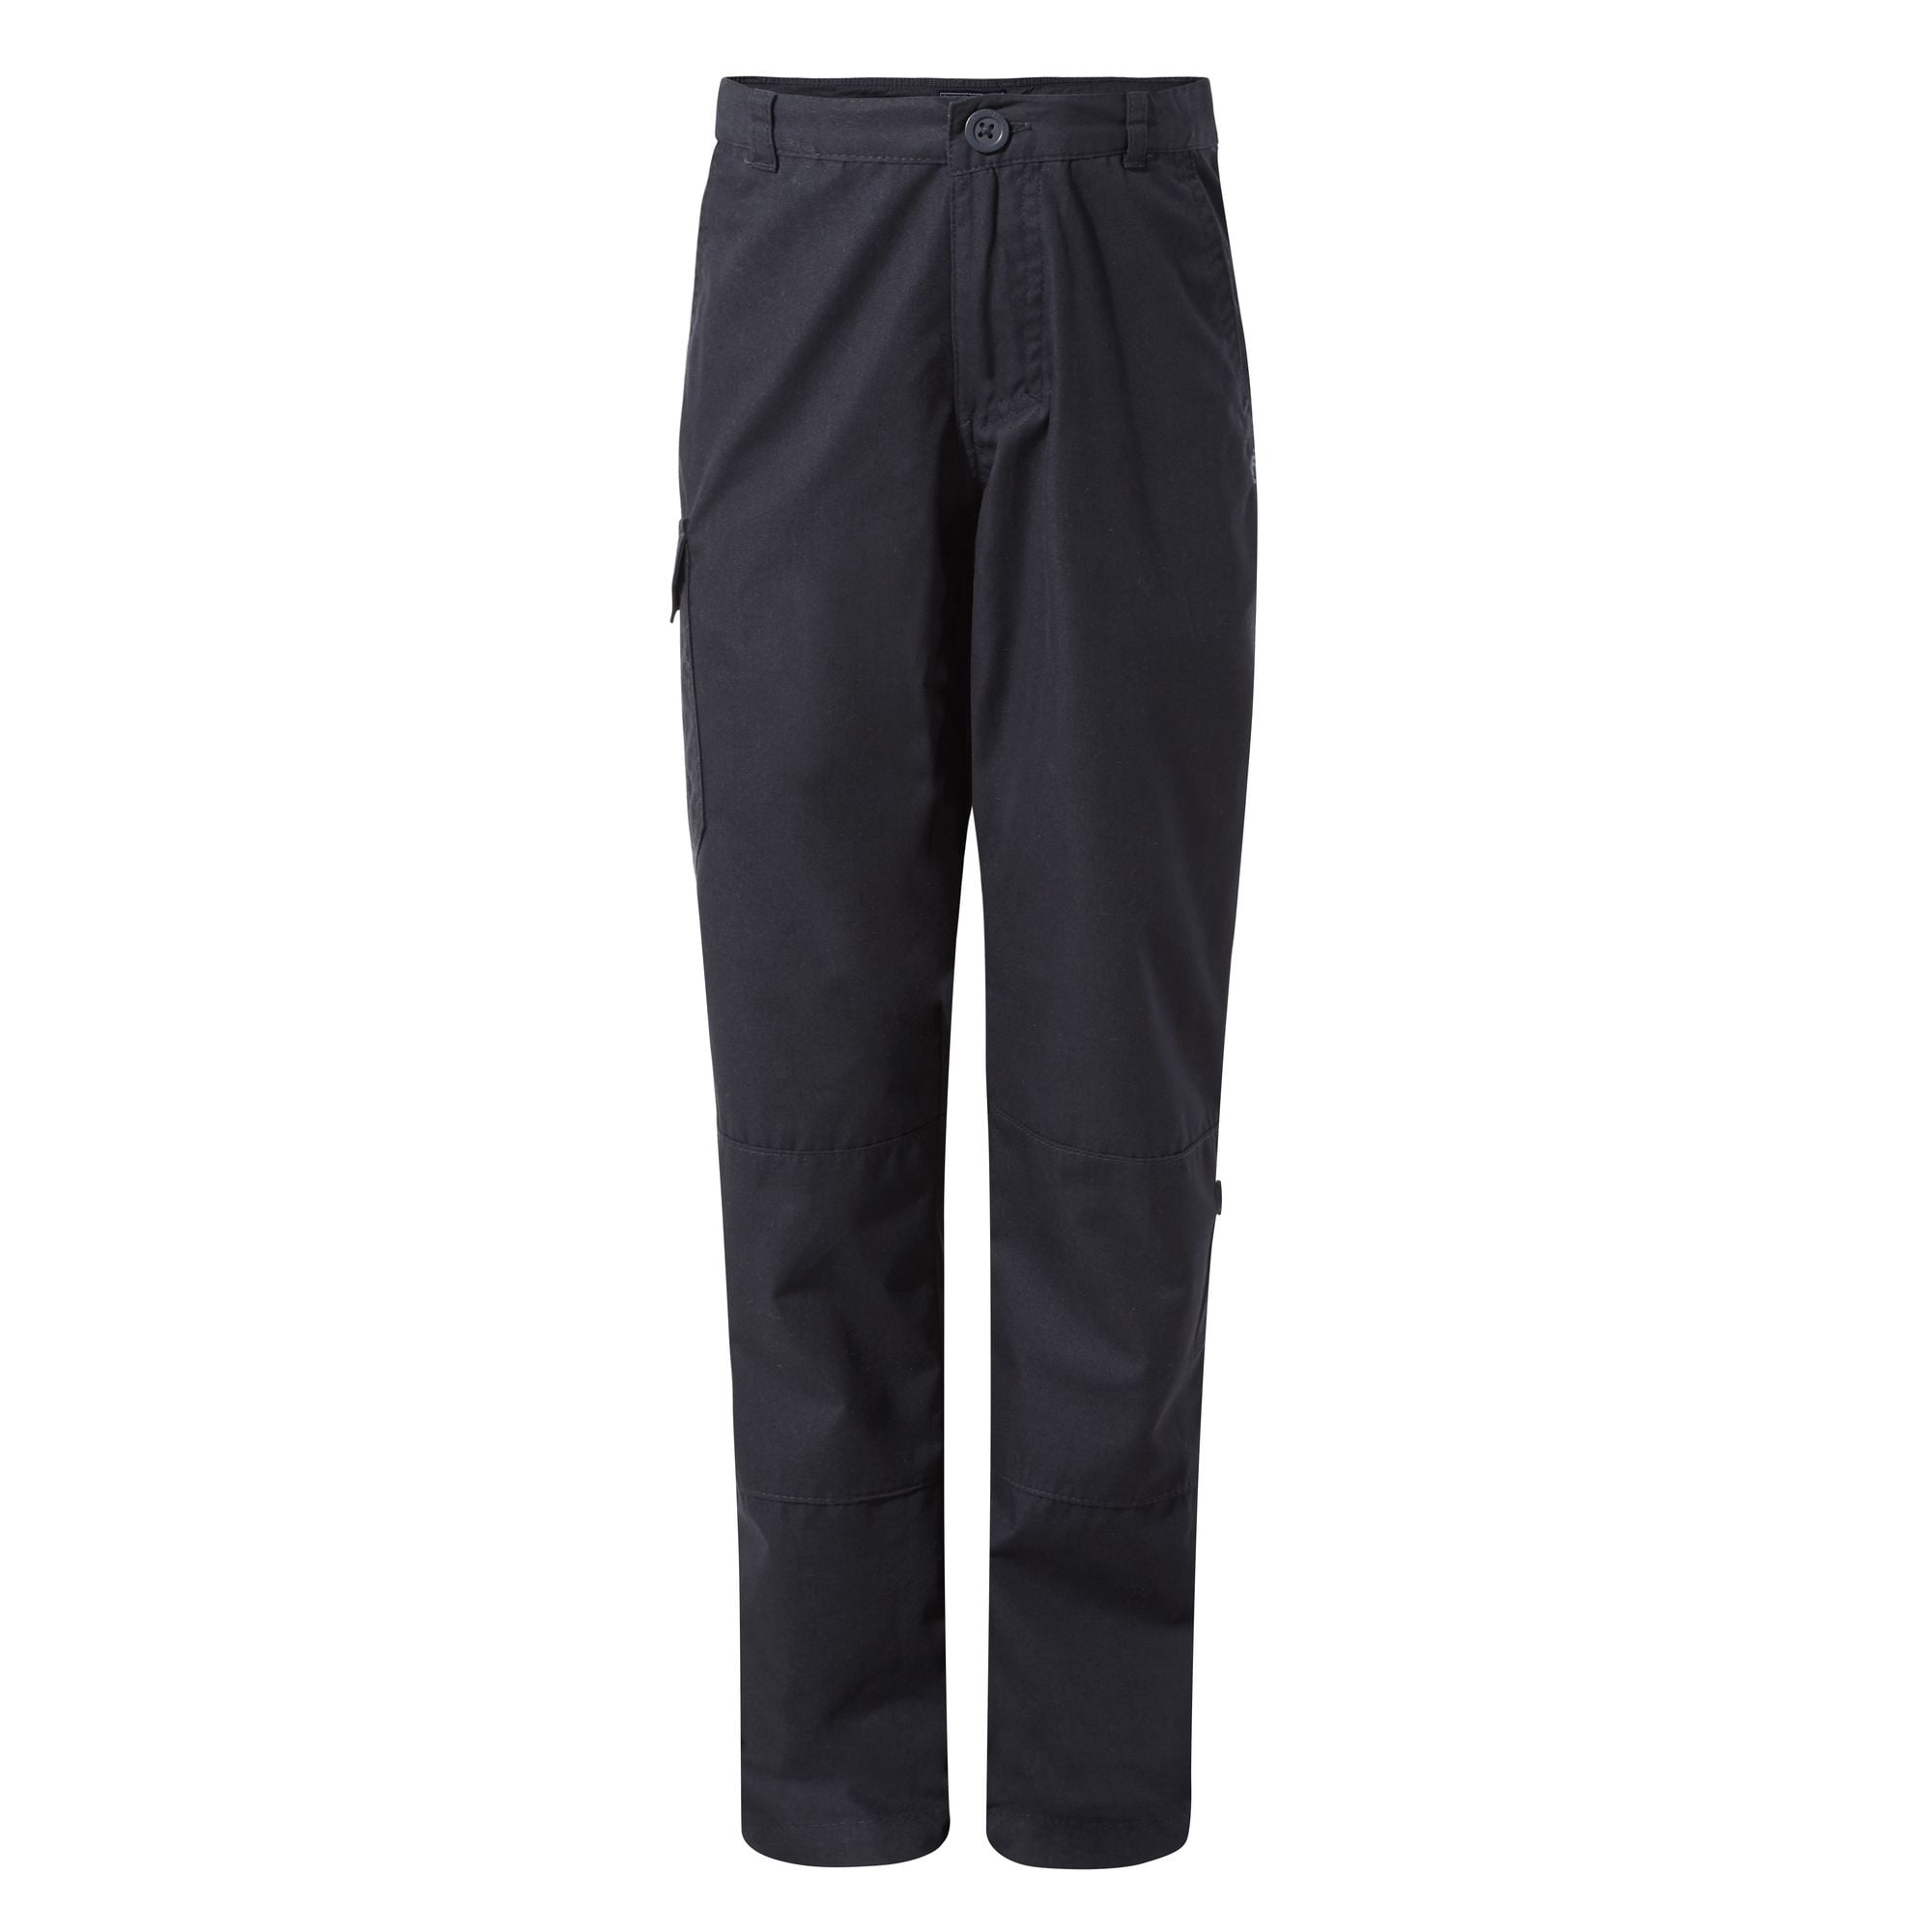 Craghoppers Craghoppers NosiDefence Kiwi II Kids Trousers 